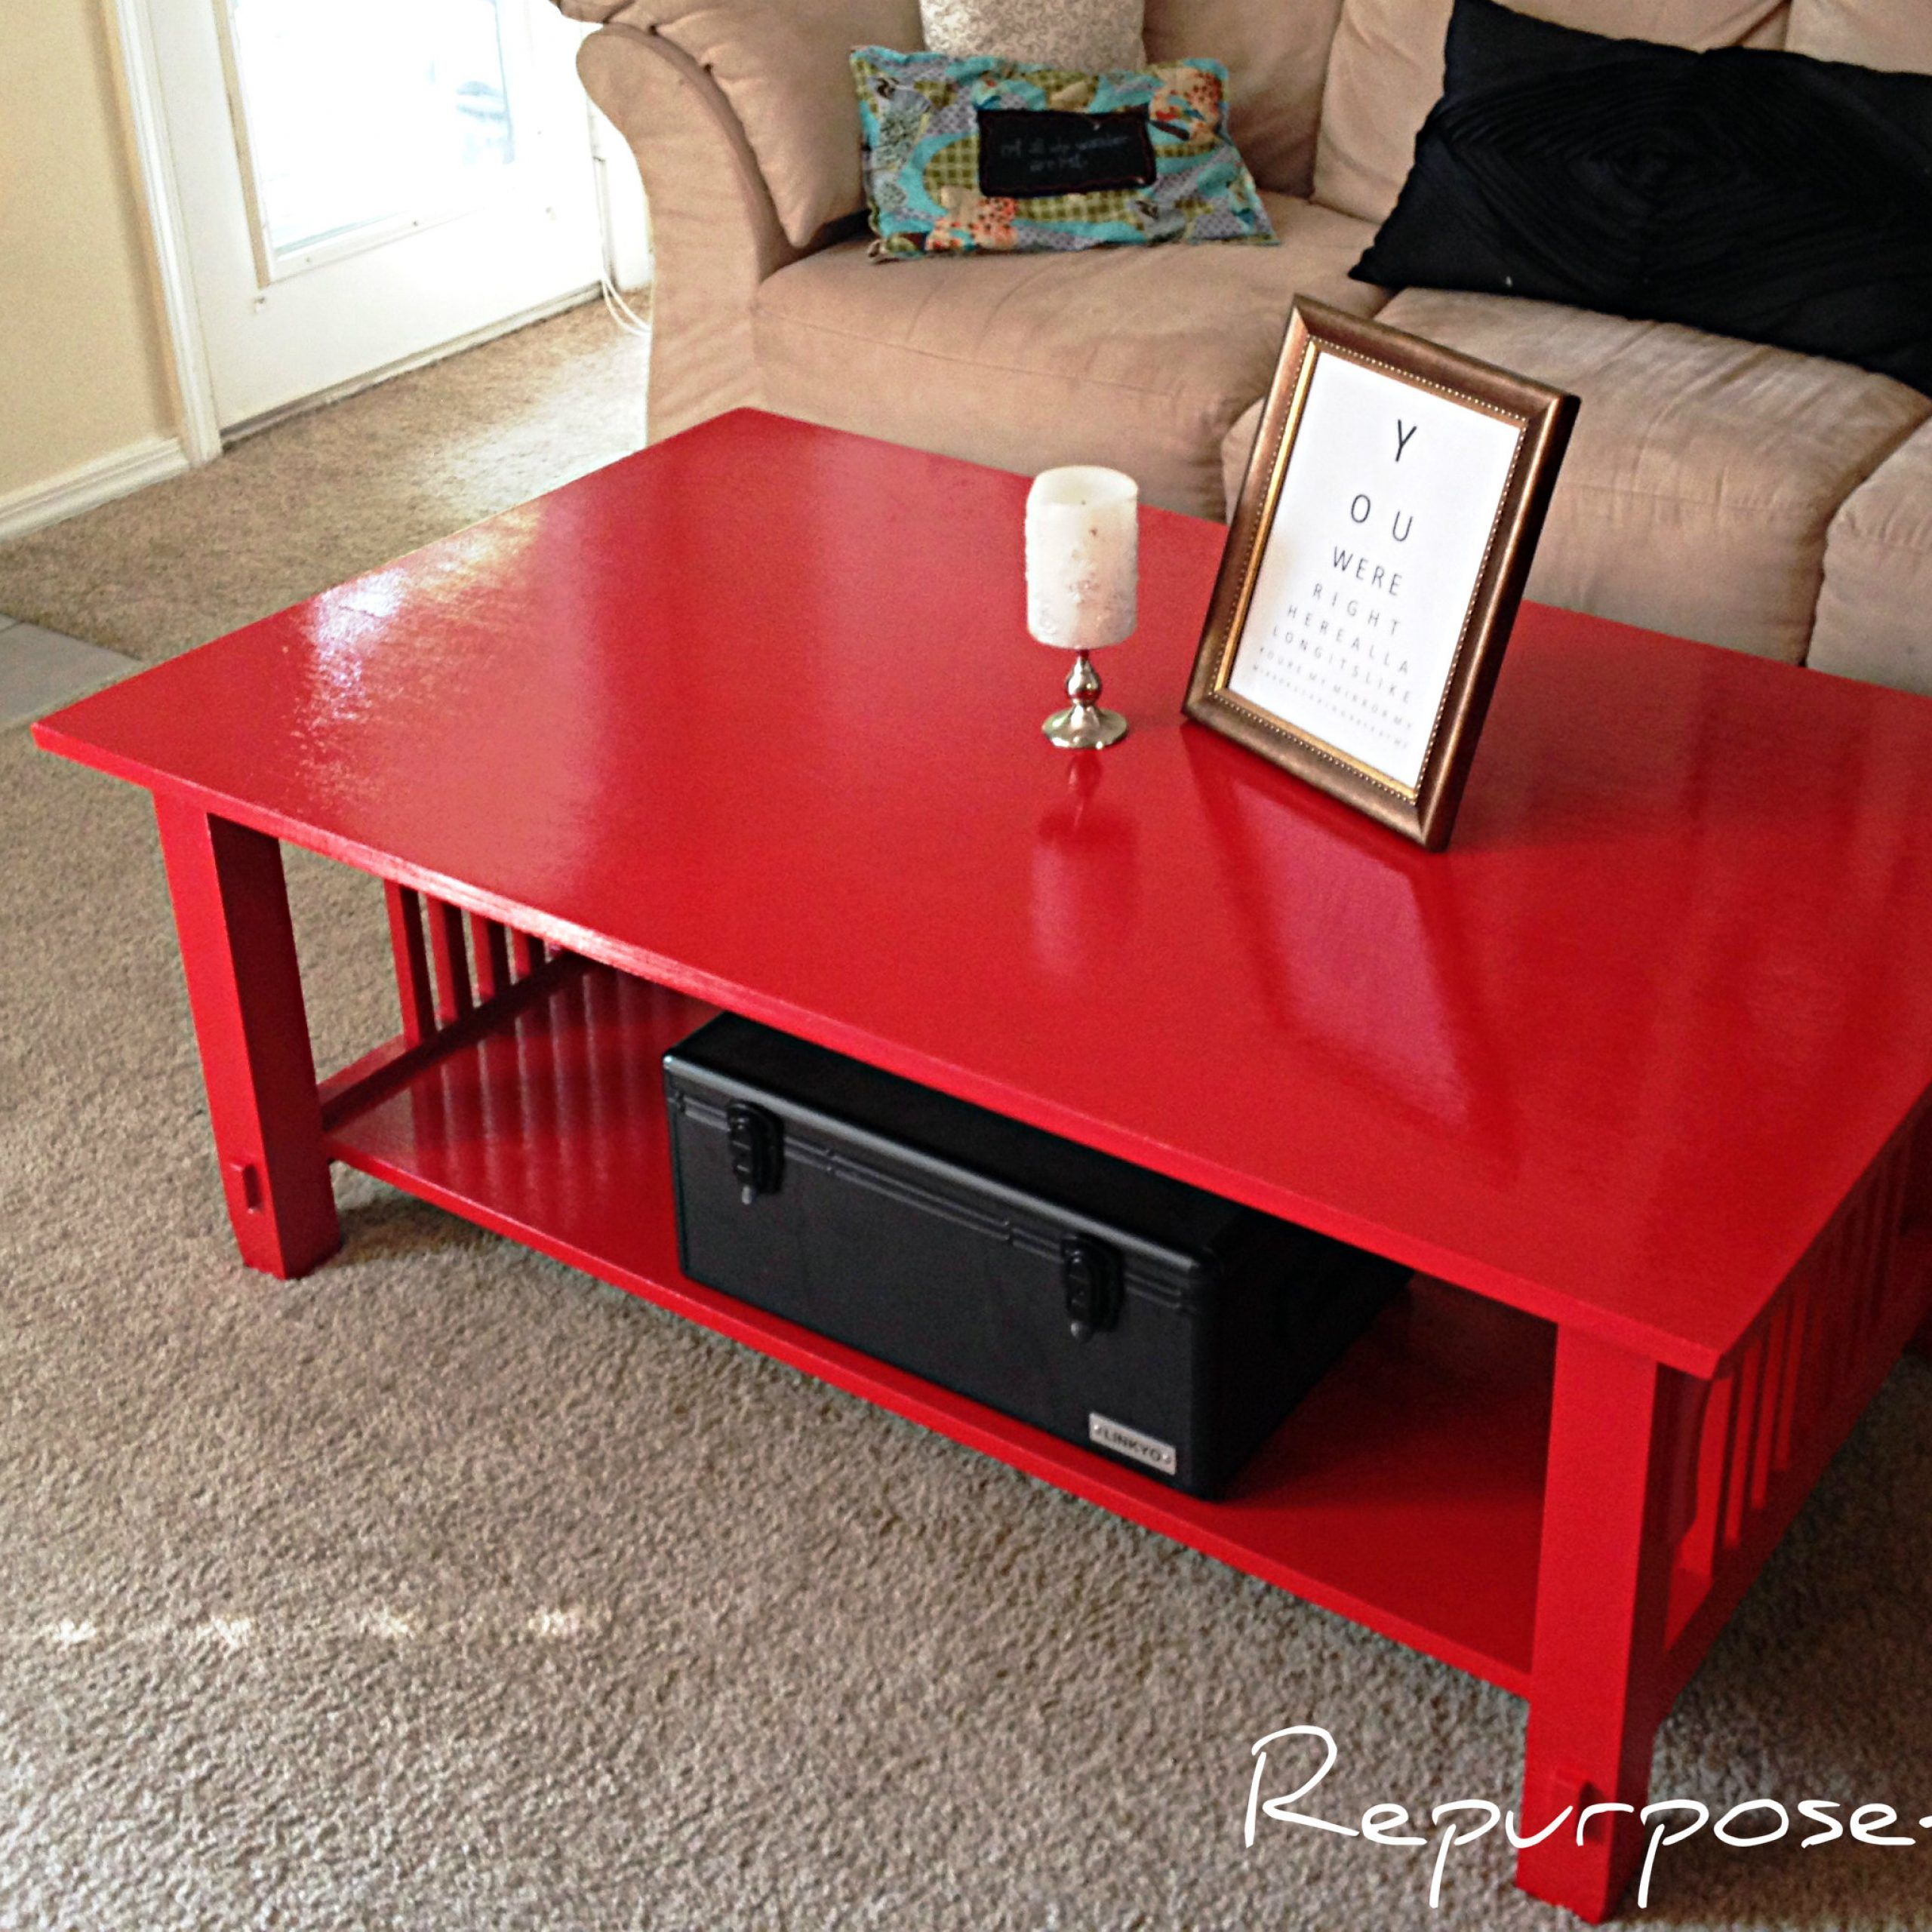 Diy: High Gloss Coffee Table Repurpose | Repurposeful Boutique Inside Paint Finish Coffee Tables (View 4 of 20)